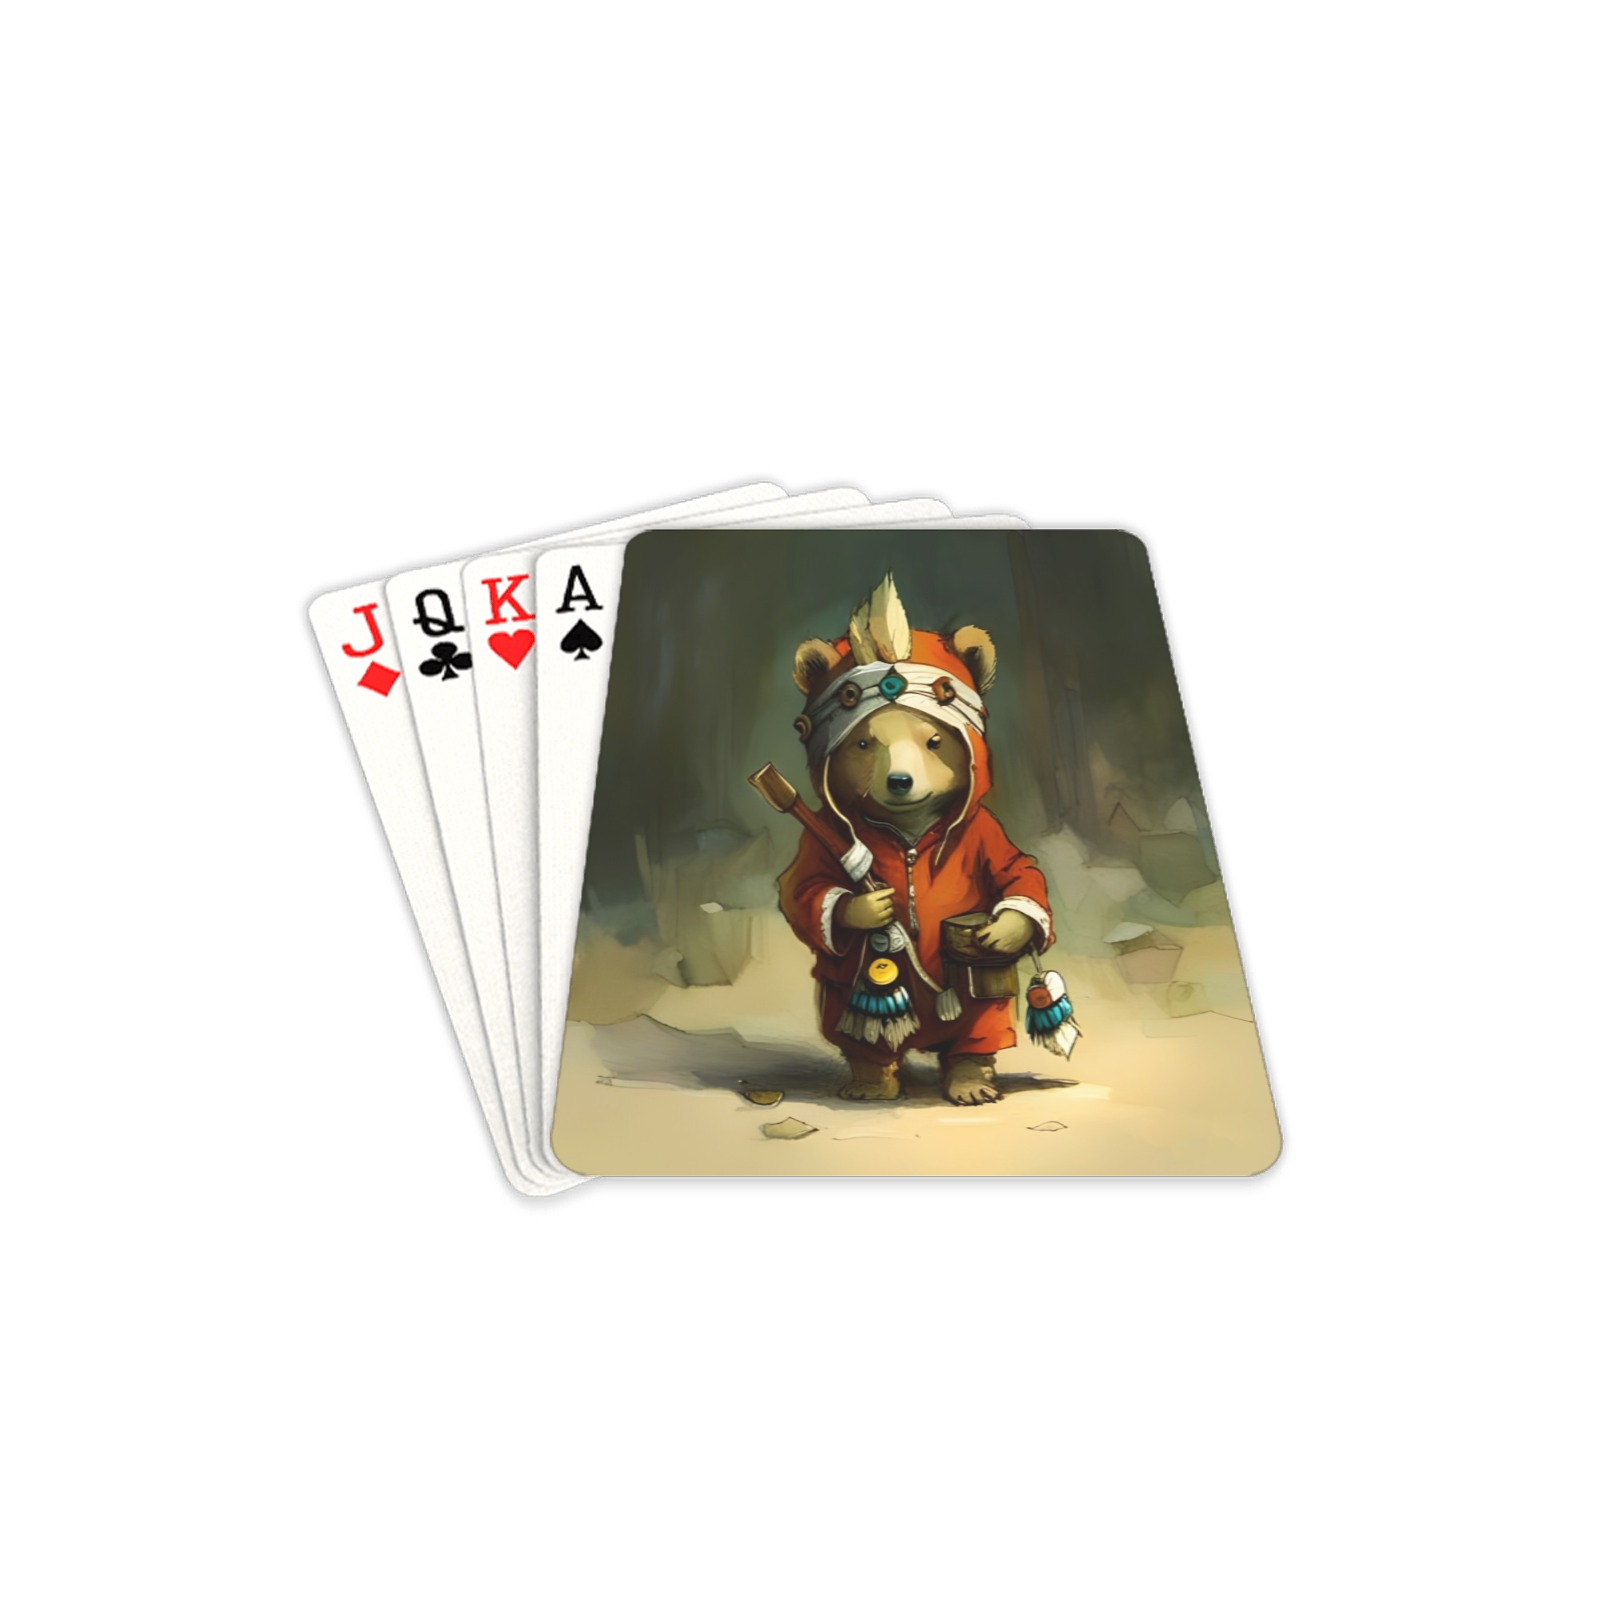 Little Bears 1 Playing Cards 2.5"x3.5"